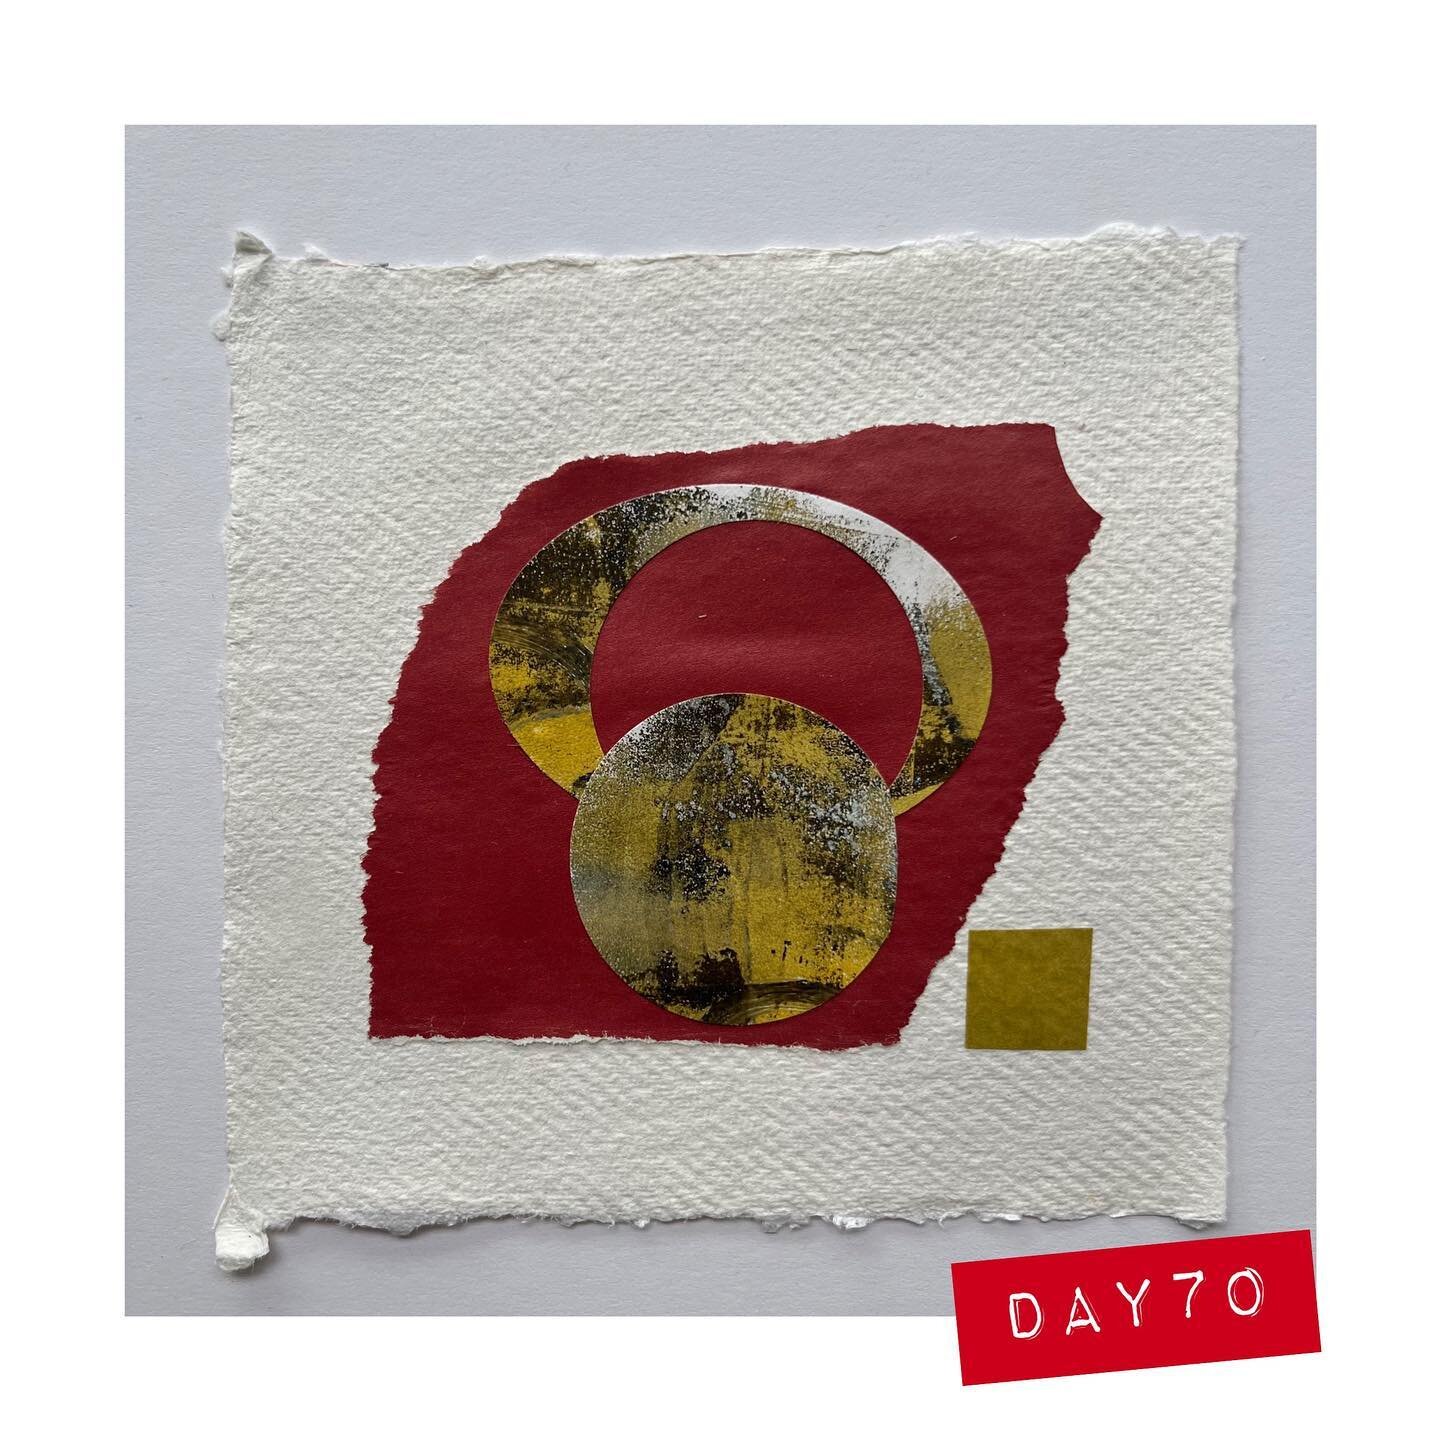 Day 70

Orbit&hellip;.

🤍 #100dayproject2023 #the100dayproject #cqpapercollage #paperplay #gelliplate #gelliplateprinting #collage #collageart #paperart #creativeart #collageonpaper #khadipaper